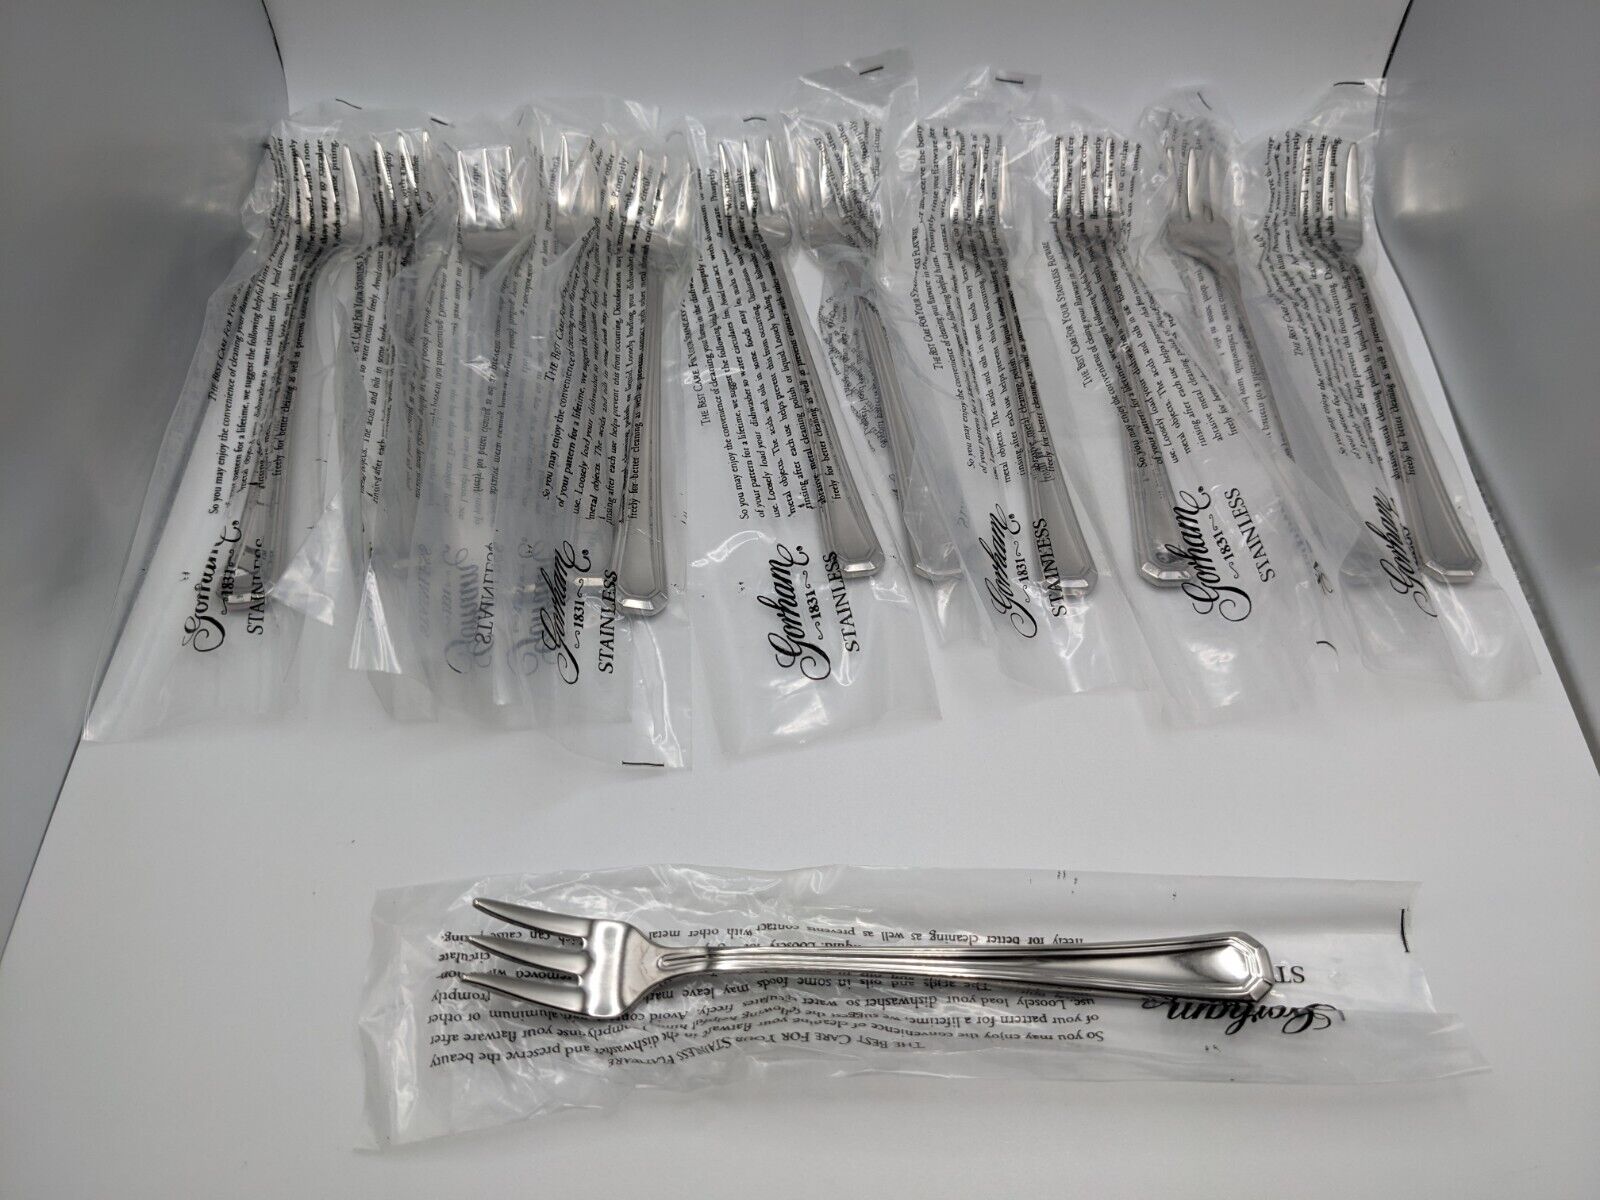 (12) New Gorham 1831 FAIRVIEW 18/8 Stainless Small Seafood Cocktail Forks Glossy